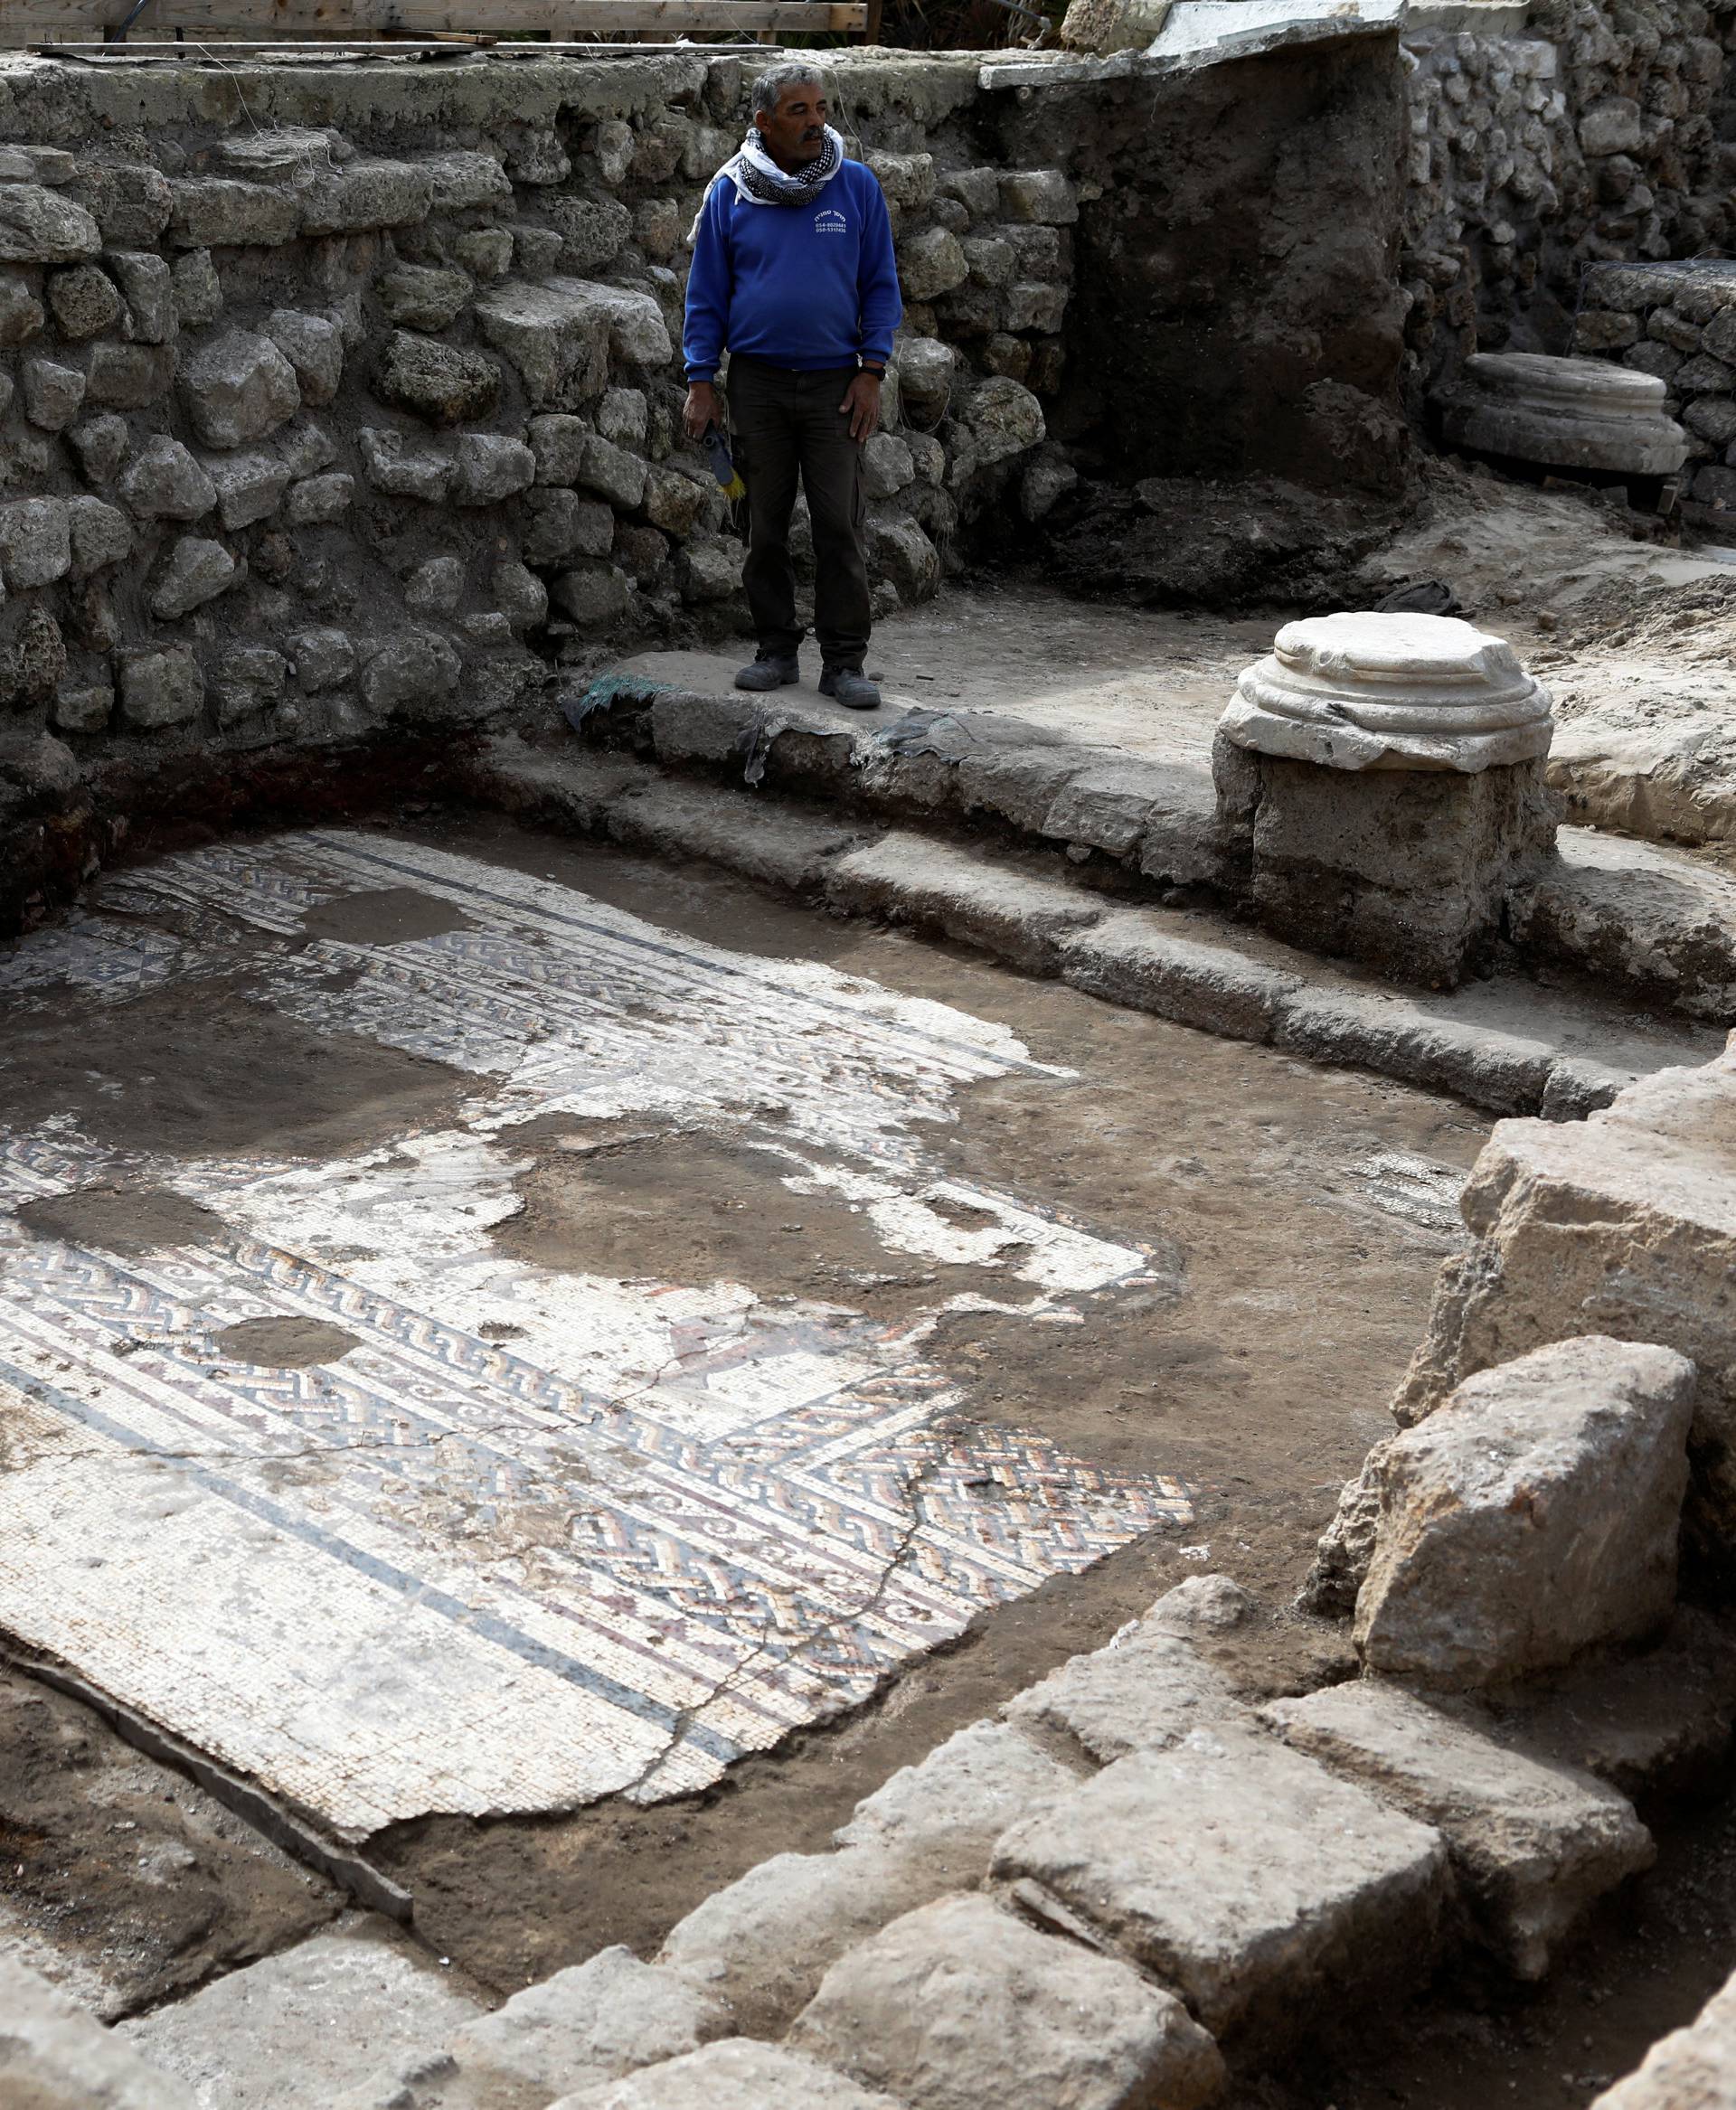 An Israel Antiquities Authority worker stands next to a mosaic floor which archaeologists say is 1,800 years old and was unearthed during an excavation in Caesarea